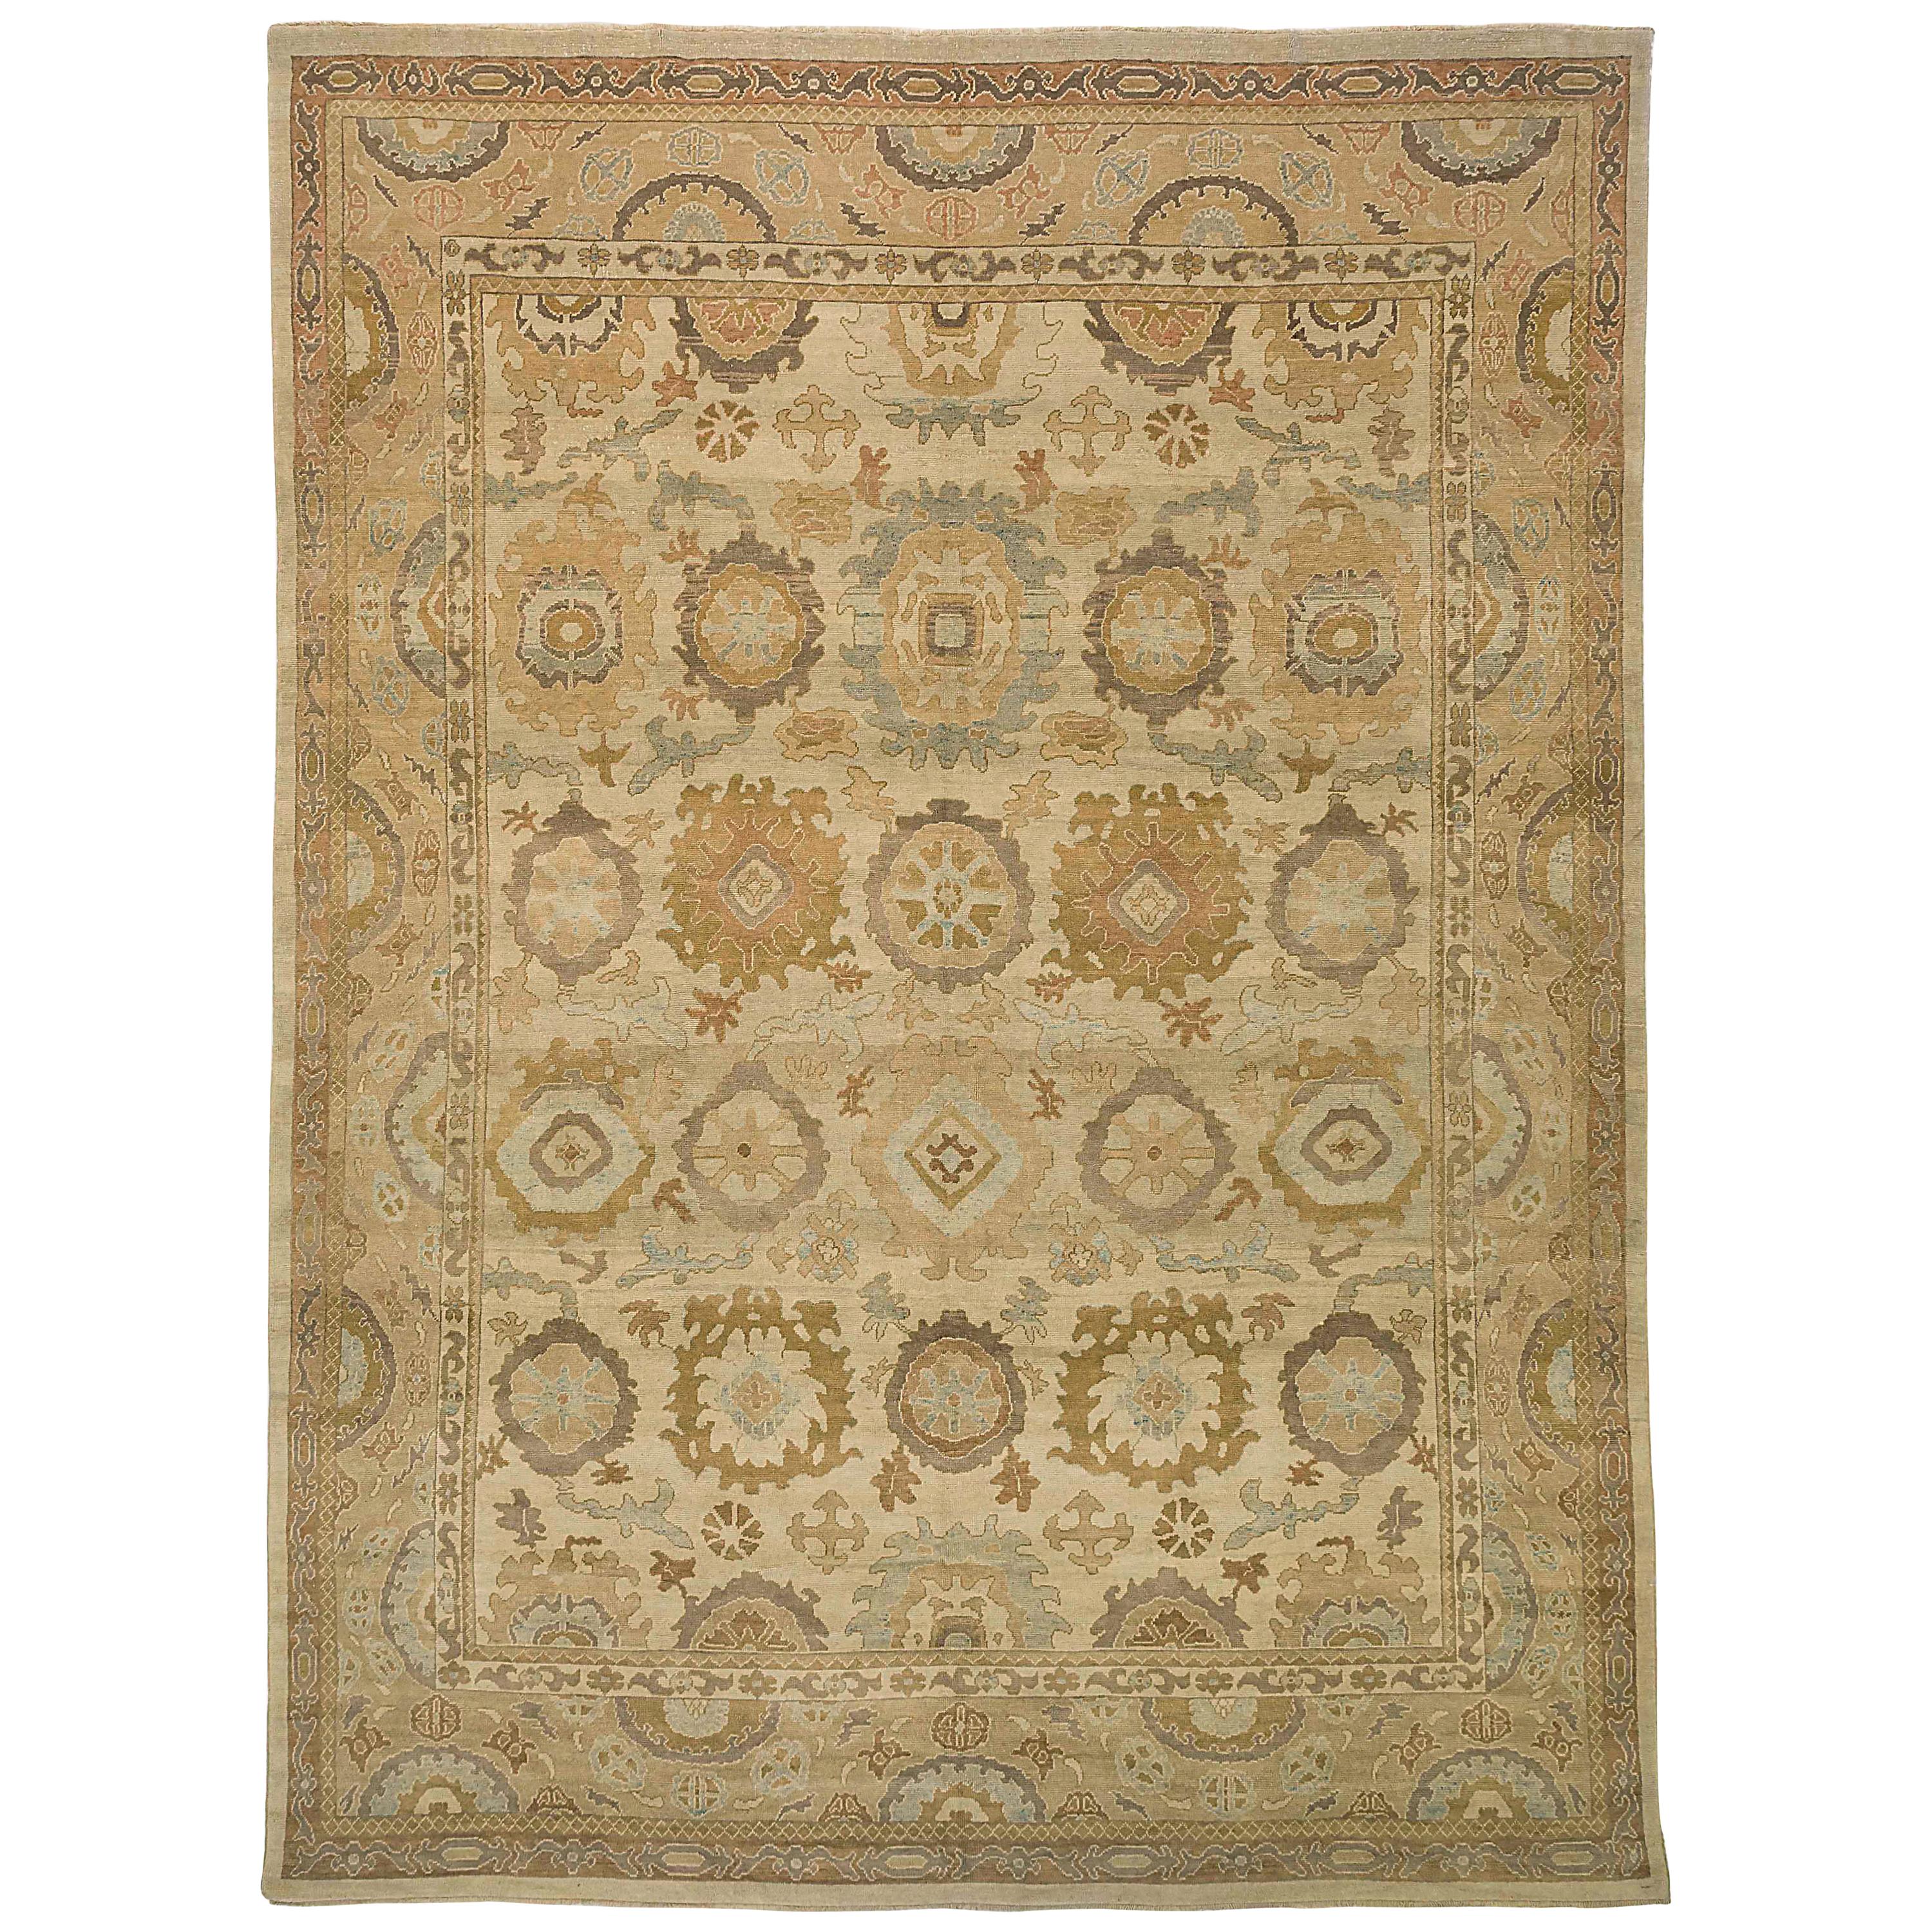 Antique Turkish Oushak Area Rug with Floral Details on Brown Field